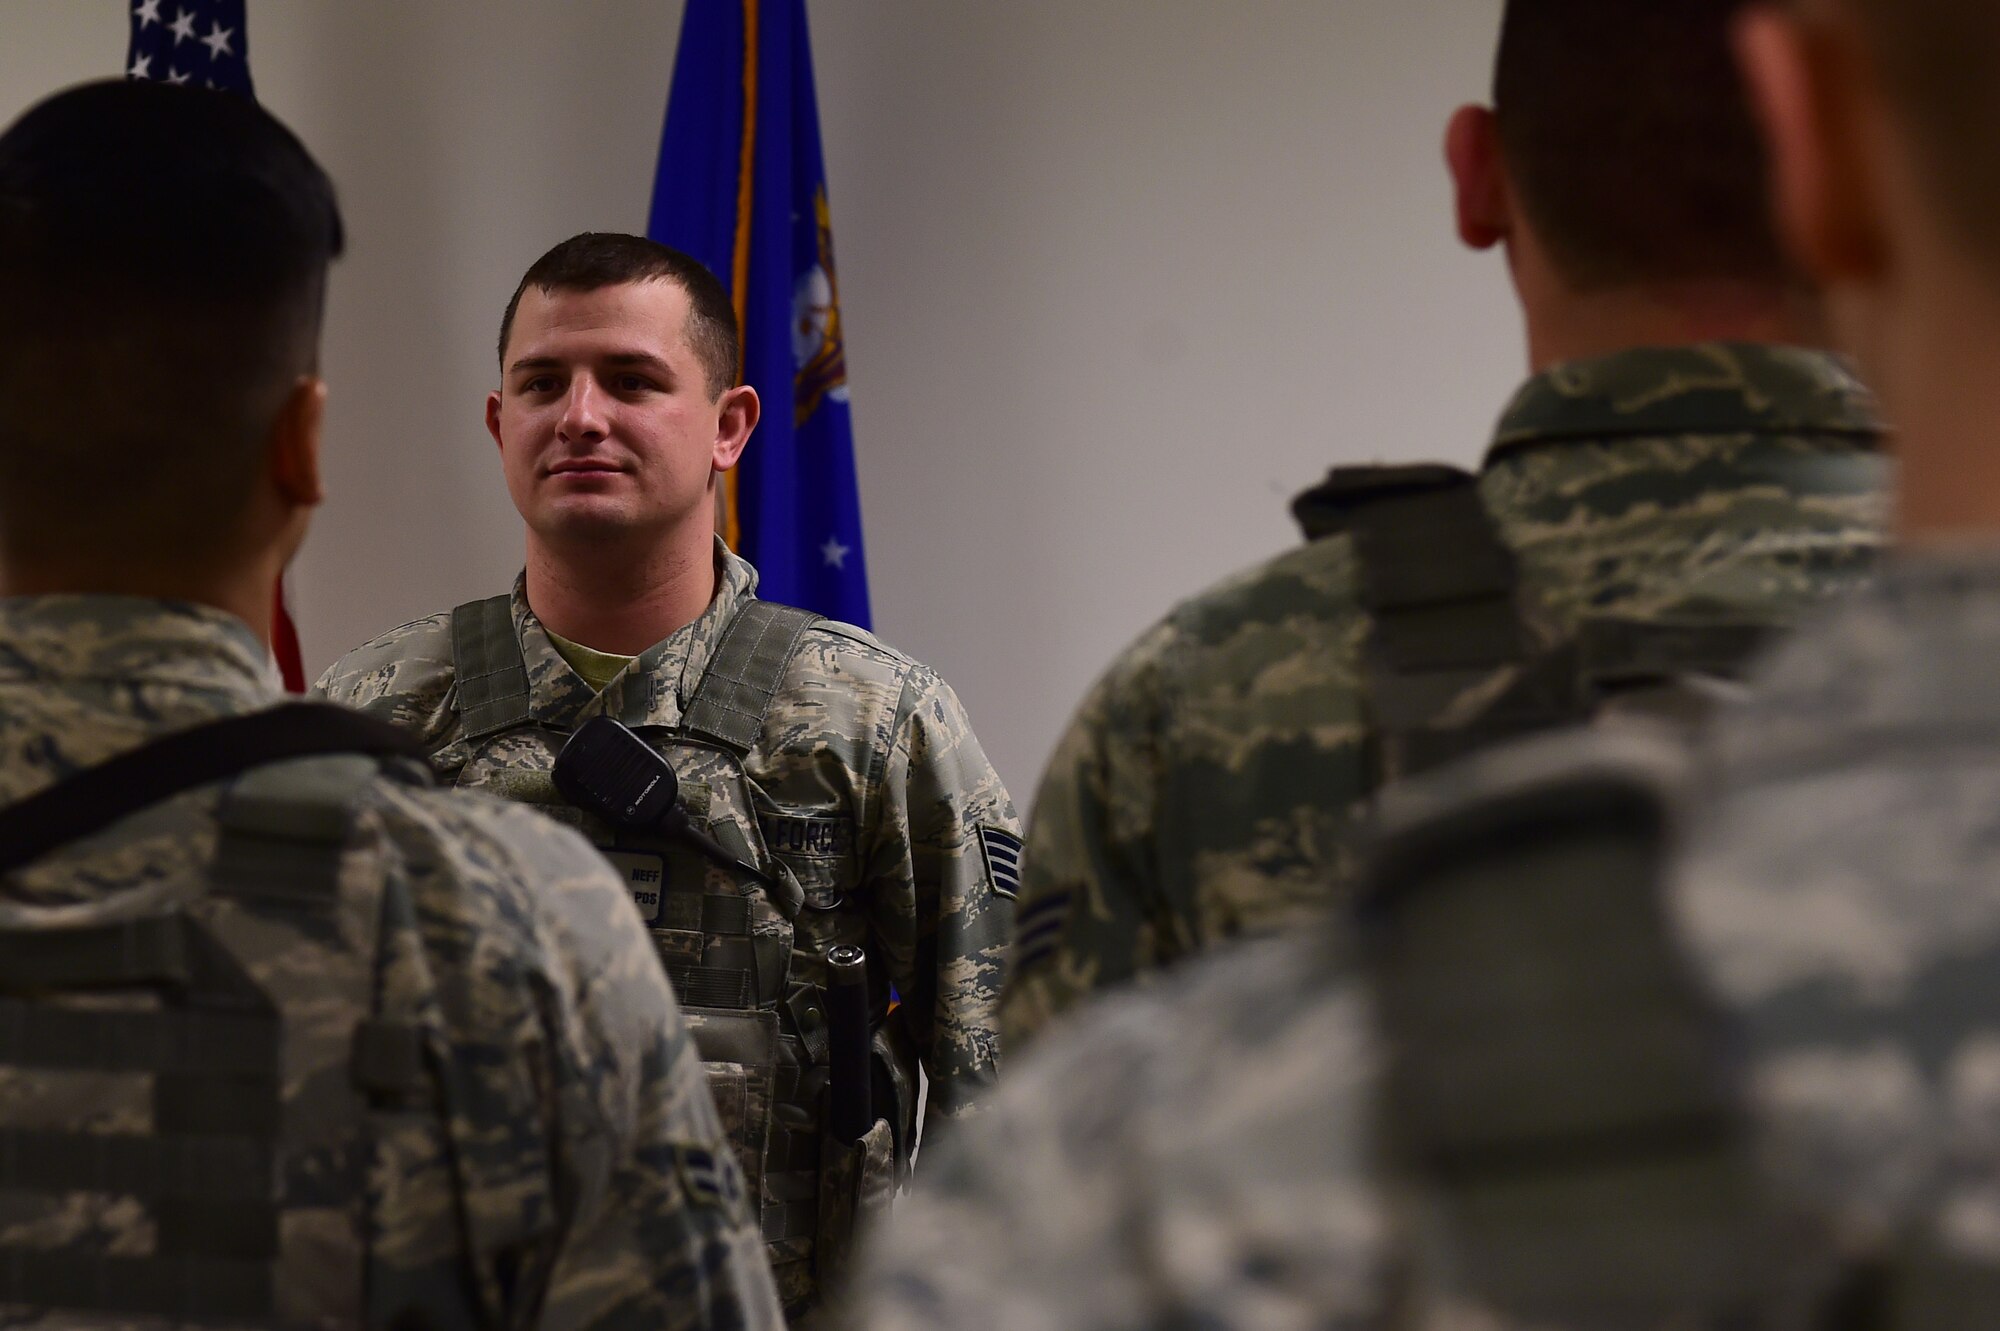 Staff Sgt. Bryce Neff, 460th Security Forces Squadron flight chief, debriefs Airmen coming off duty during shift change Jan. 13, 2017, on Buckley Air Force Base, Colo. Neff was highlighted by Col. David Miller Jr., 460th Space Wing commander, for his exceptional performance with ensuring Installation Readiness through numerous exercises and assessments.